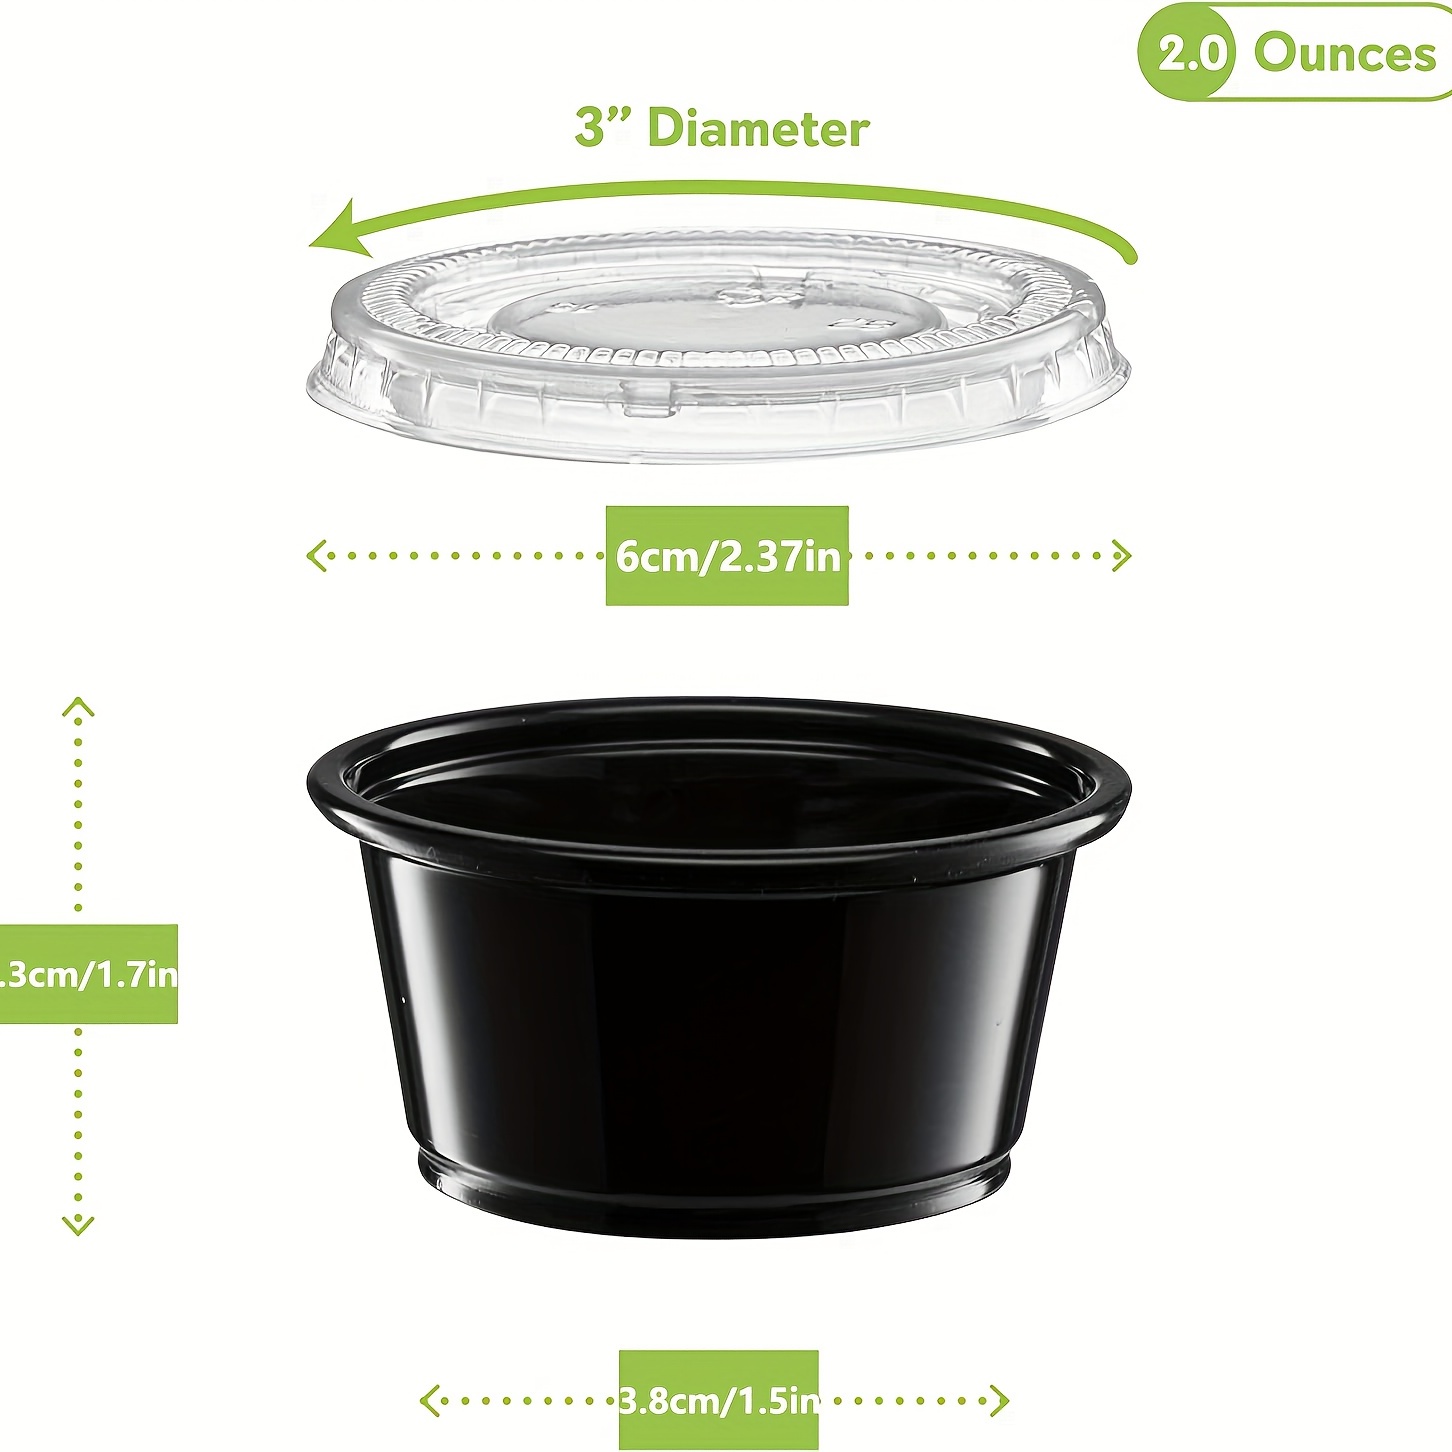 Solo SCCLDSS23 Wide Sauce / Portion Cup Snaptight Lid for 2.5 oz. and 3.5  oz. Cups - 100/